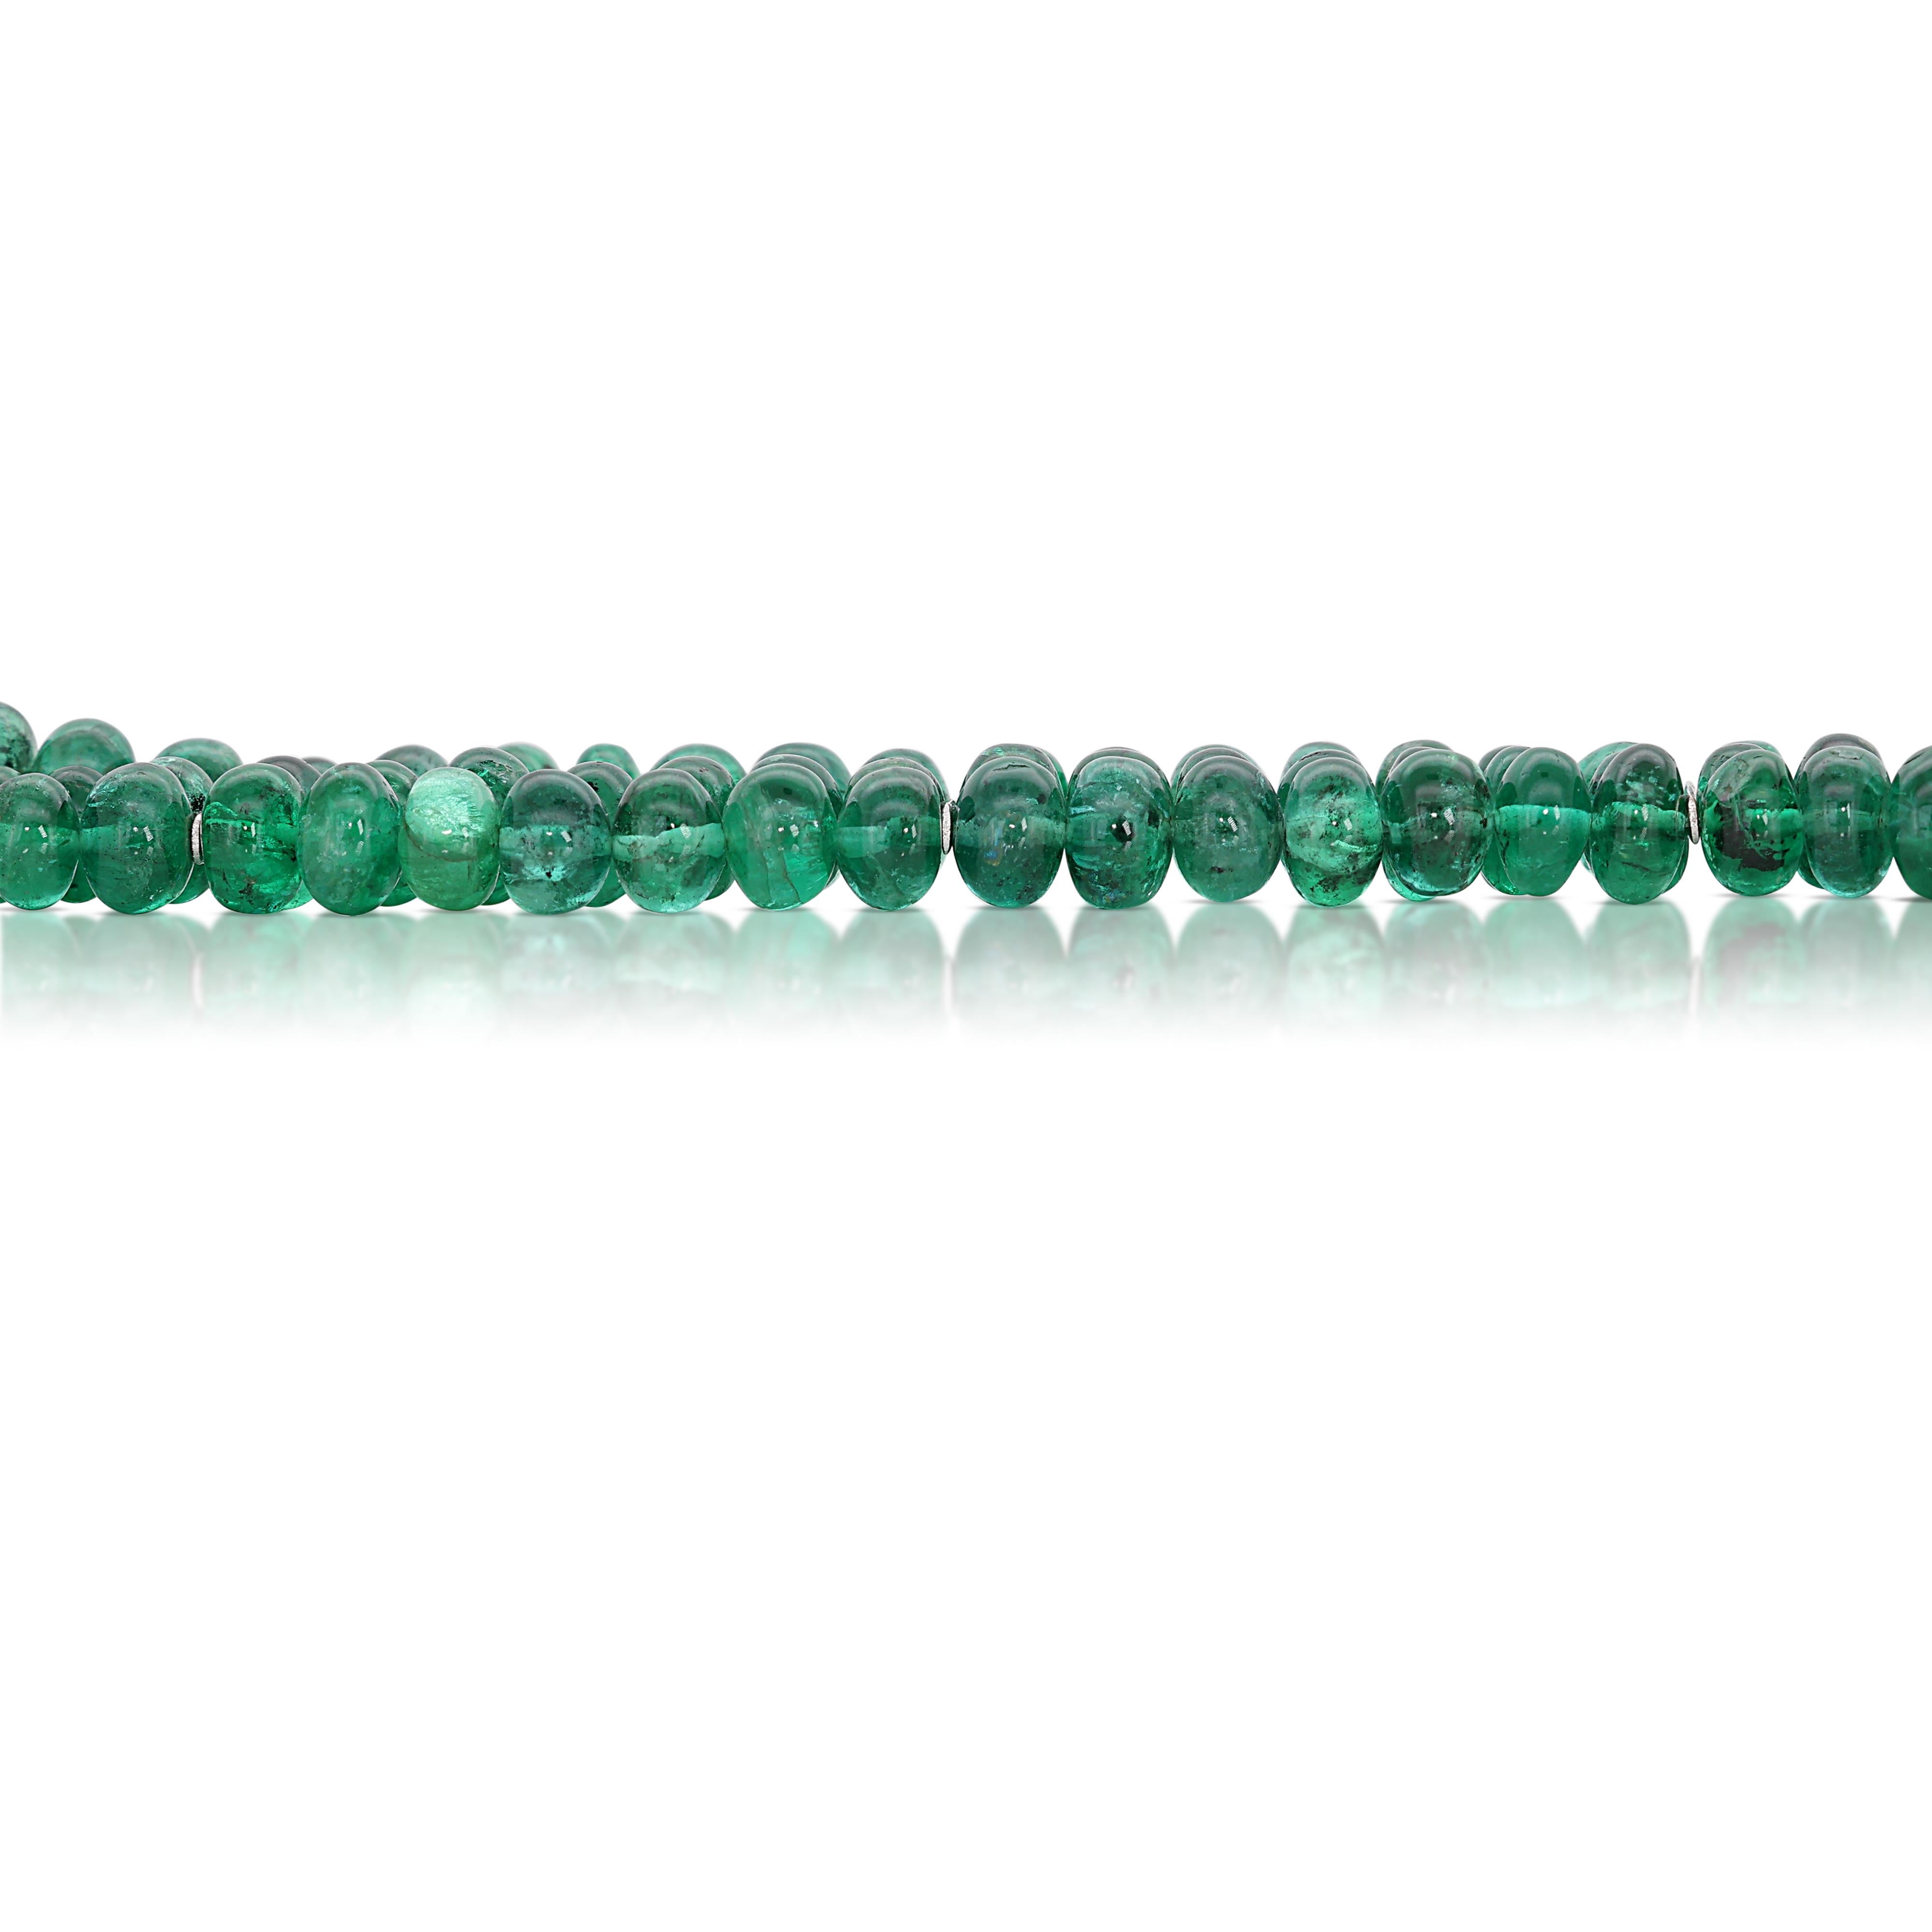 Stunning 4.76ct Emerald Bracelet with Diamonds in 18K White Gold  For Sale 2